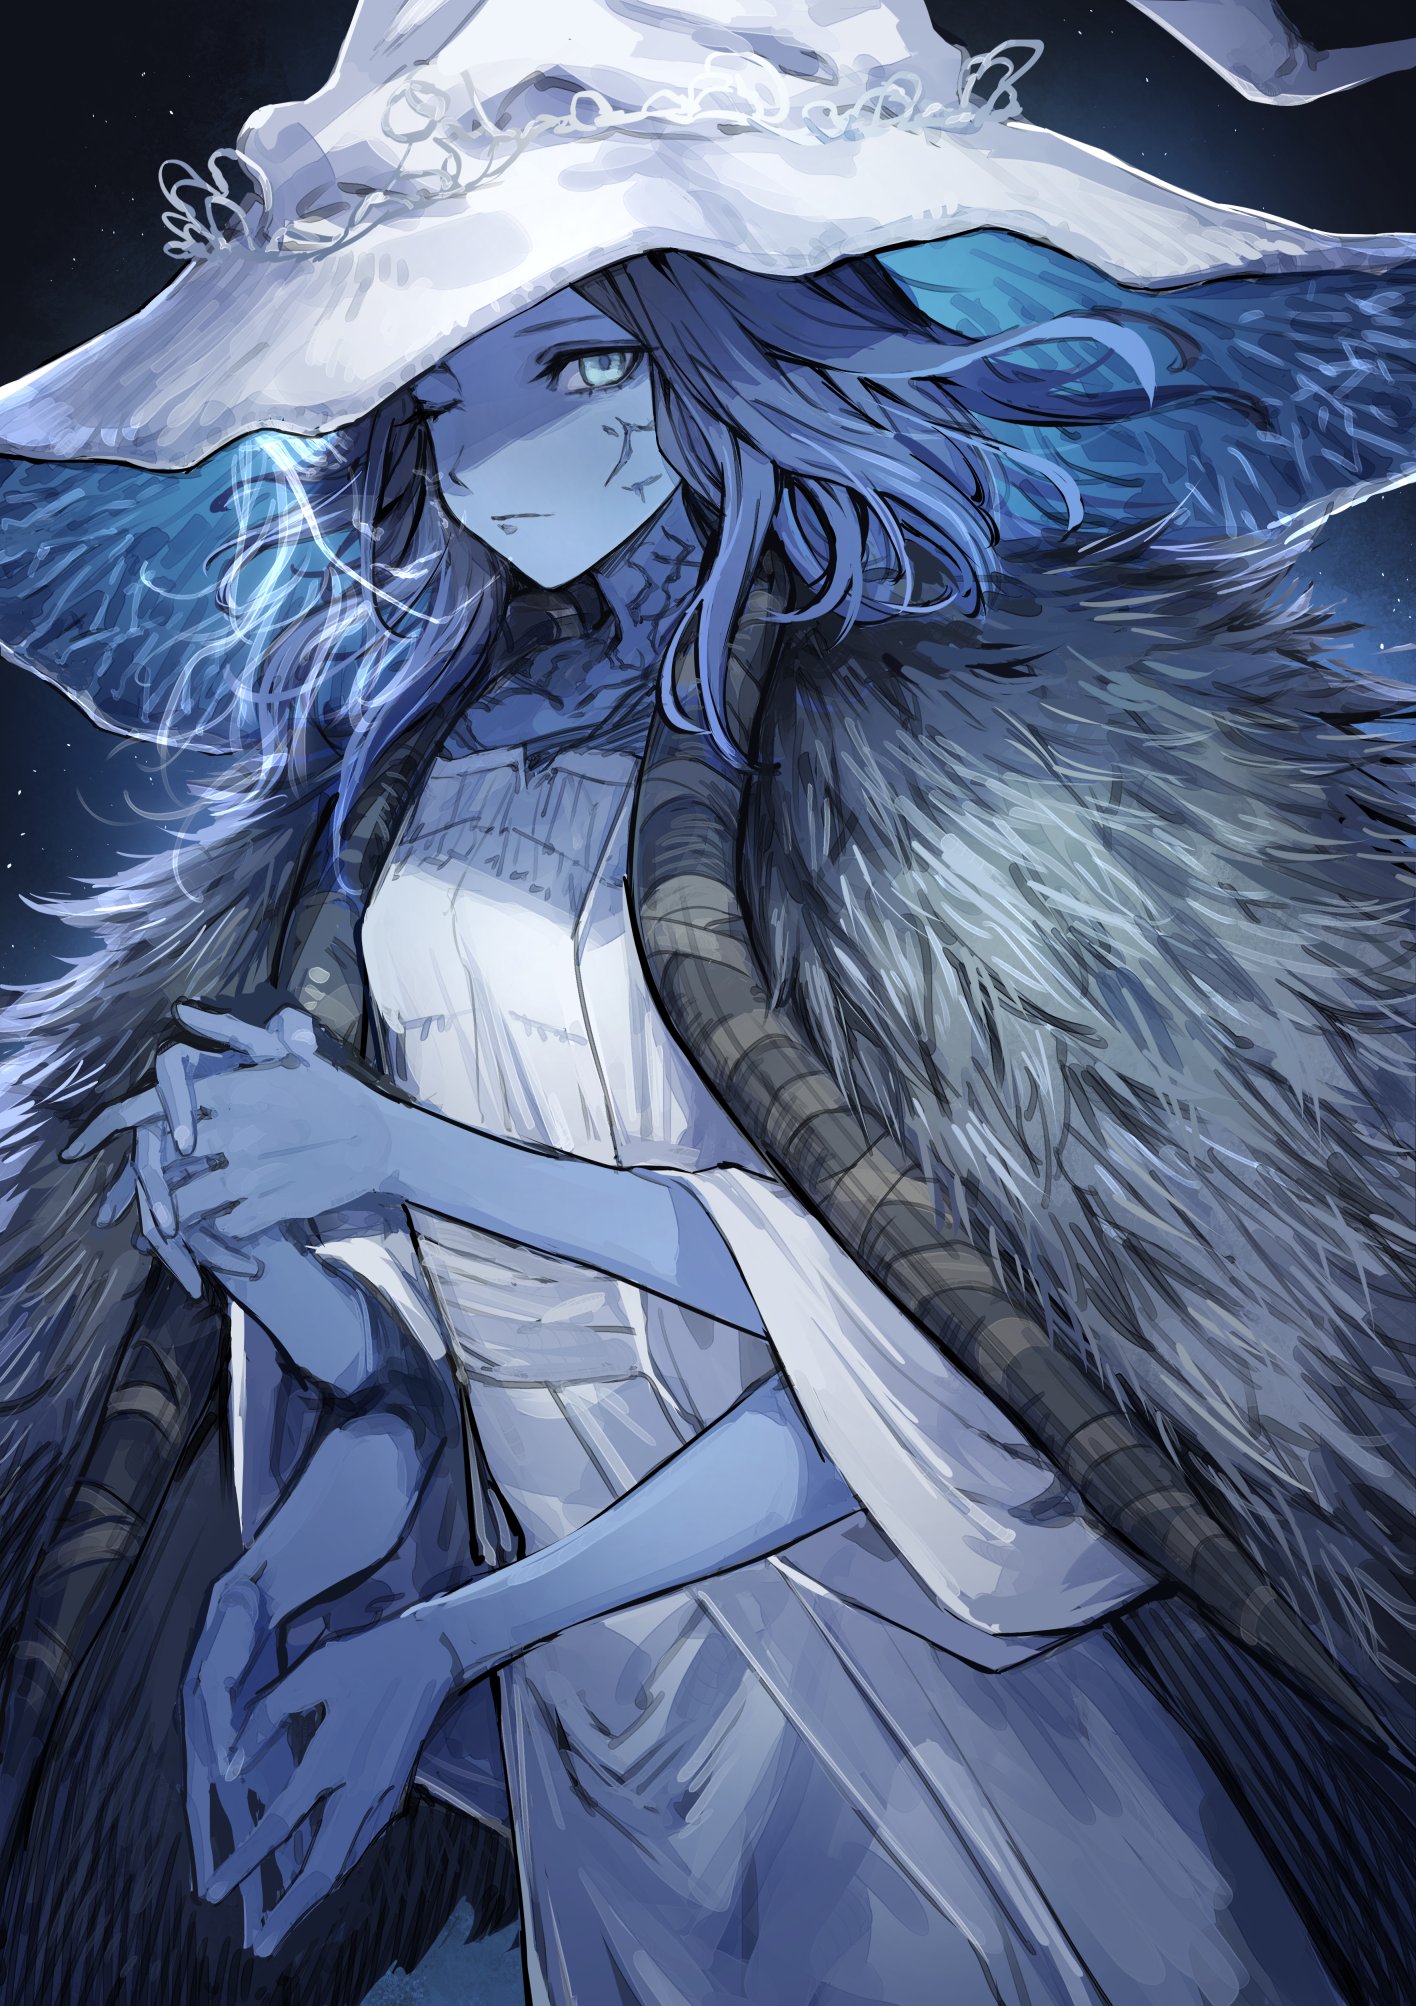 Ranni The Witch Phone Wallpapers